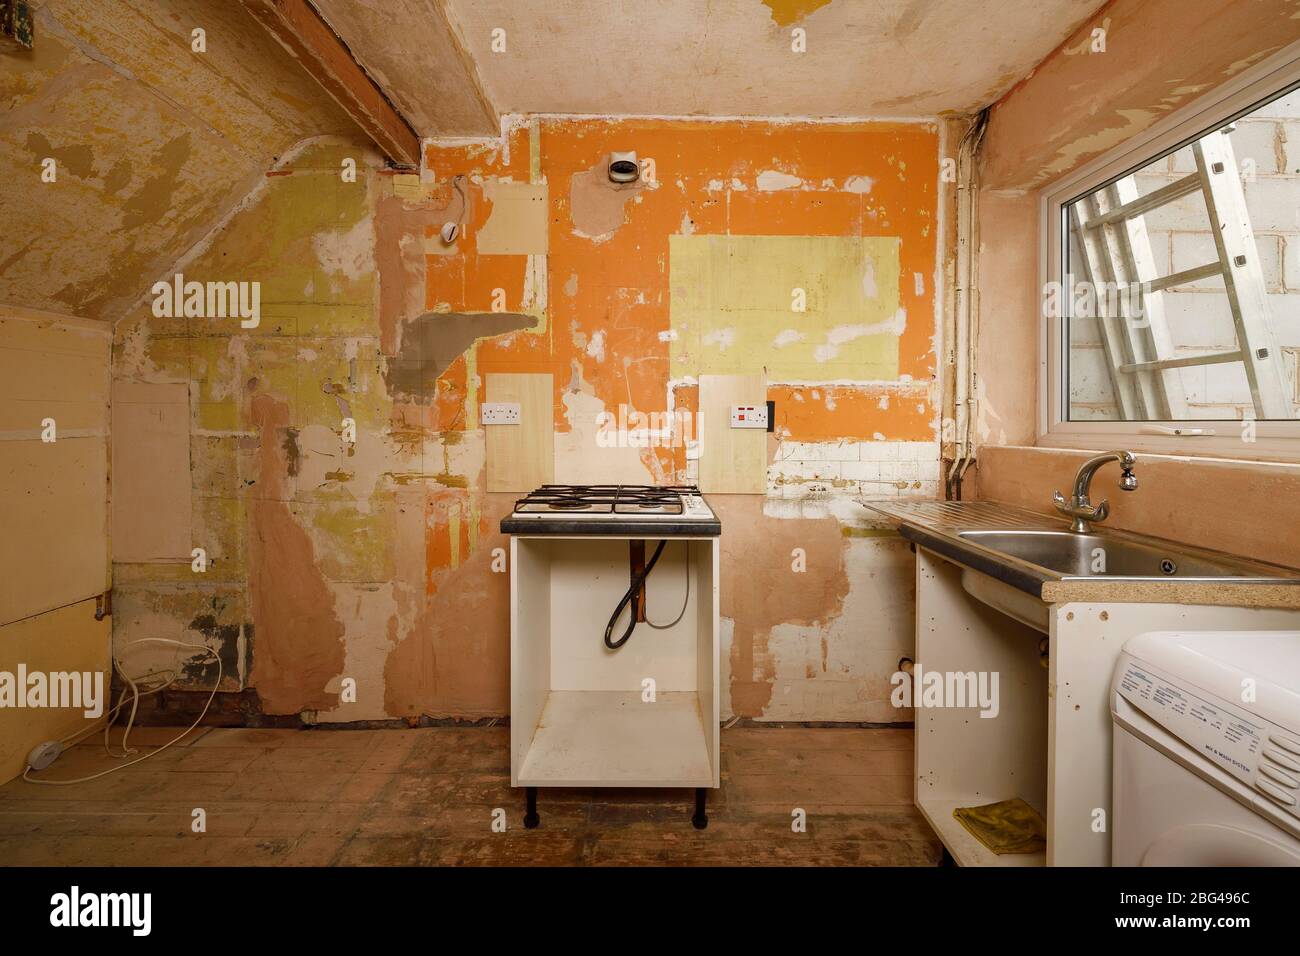 An old kitchen stripped back to bare walls during a renovation project Stock Photo